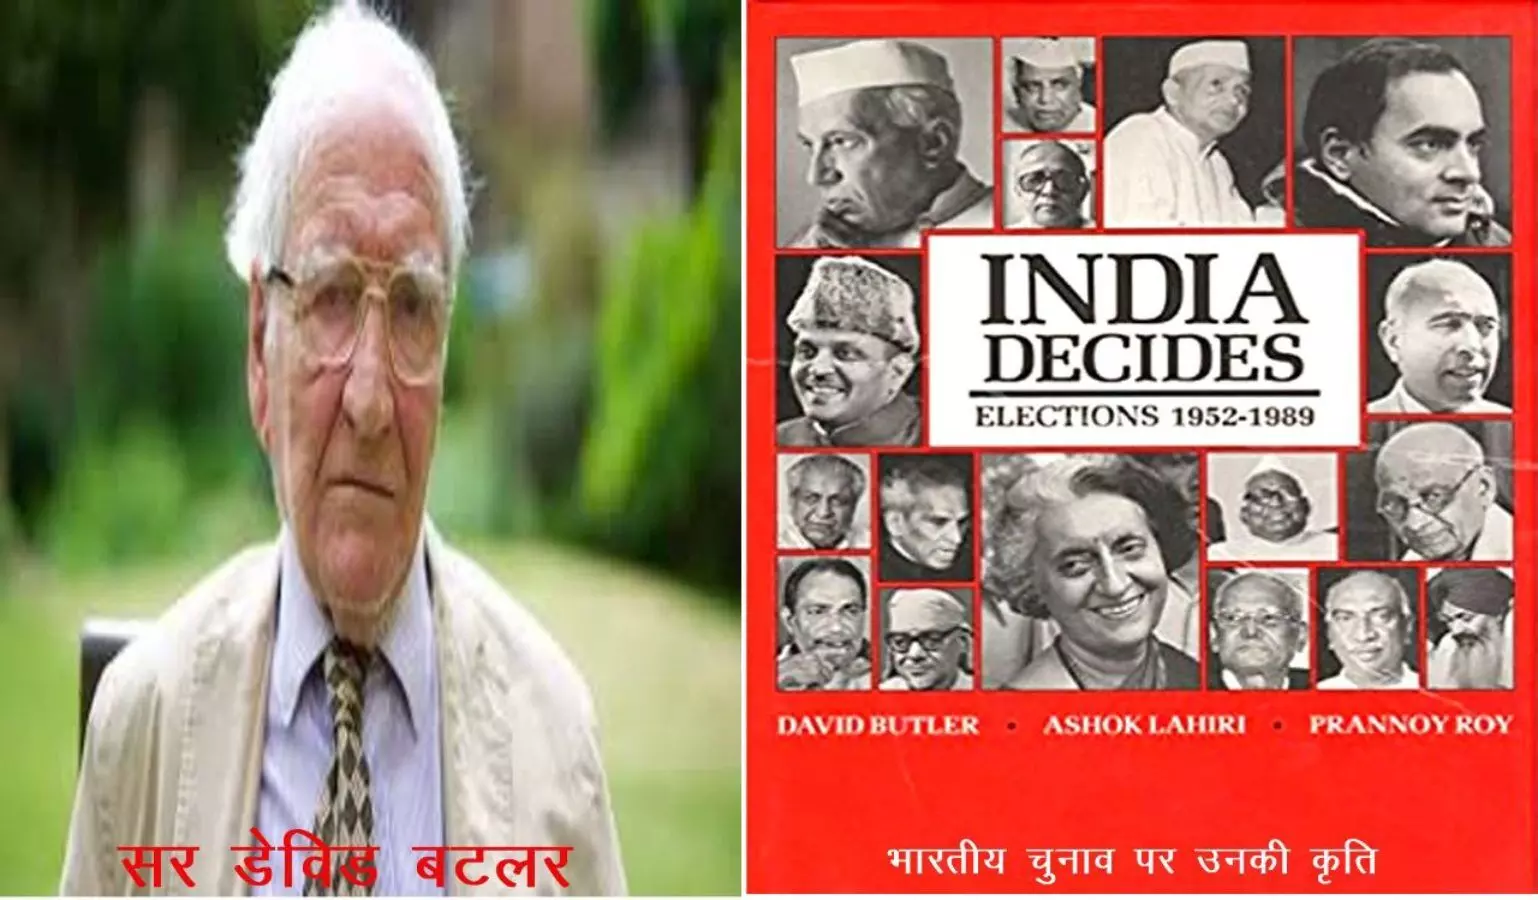 The passing of Sir David Edgeworth Butler, the unmatched guru of electoral analysis!